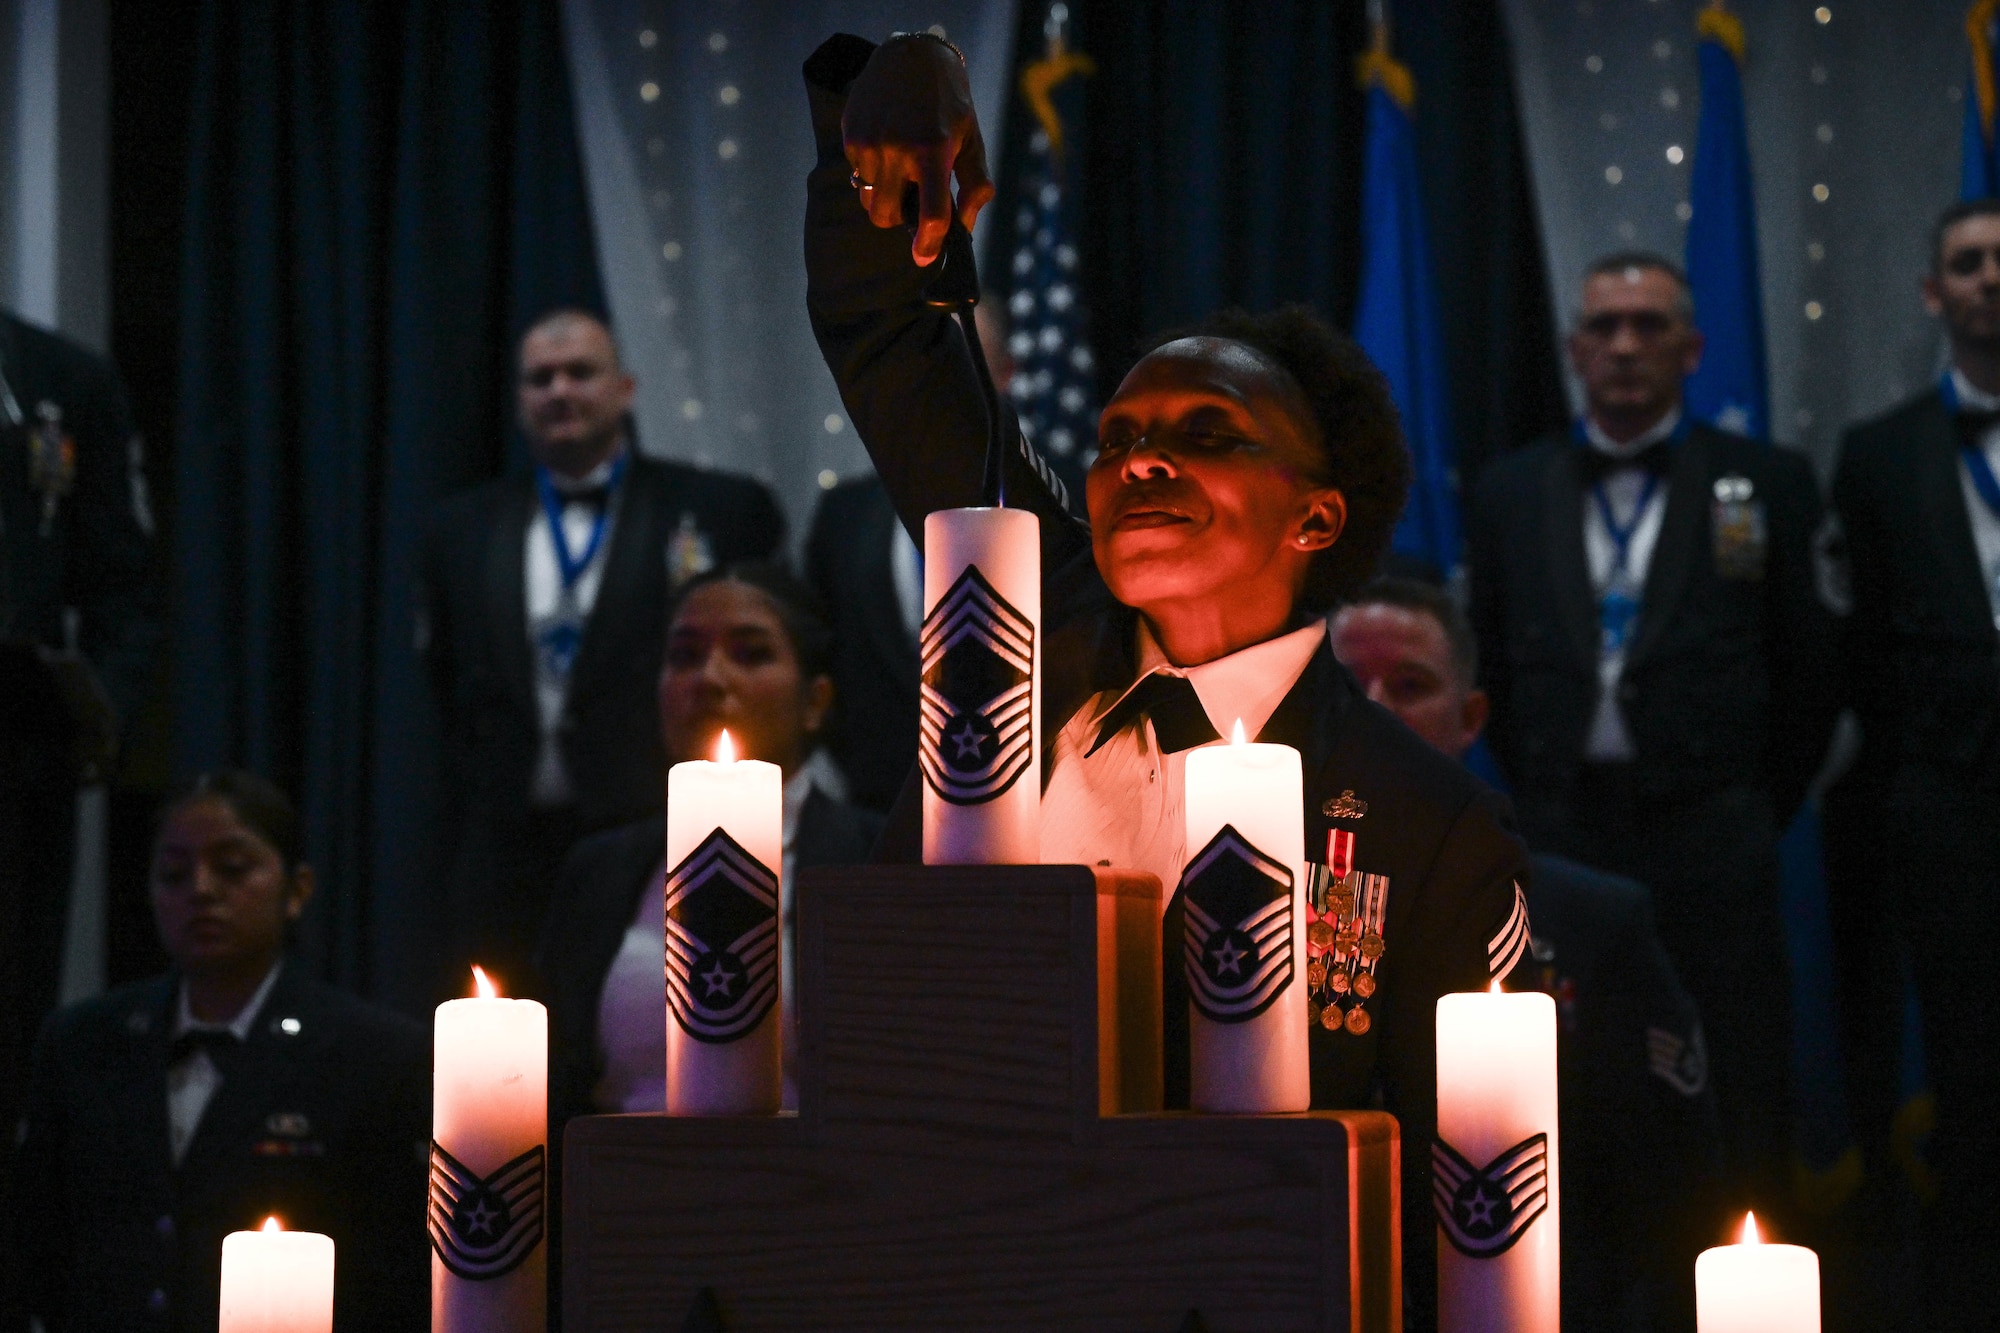 Airman lights candle